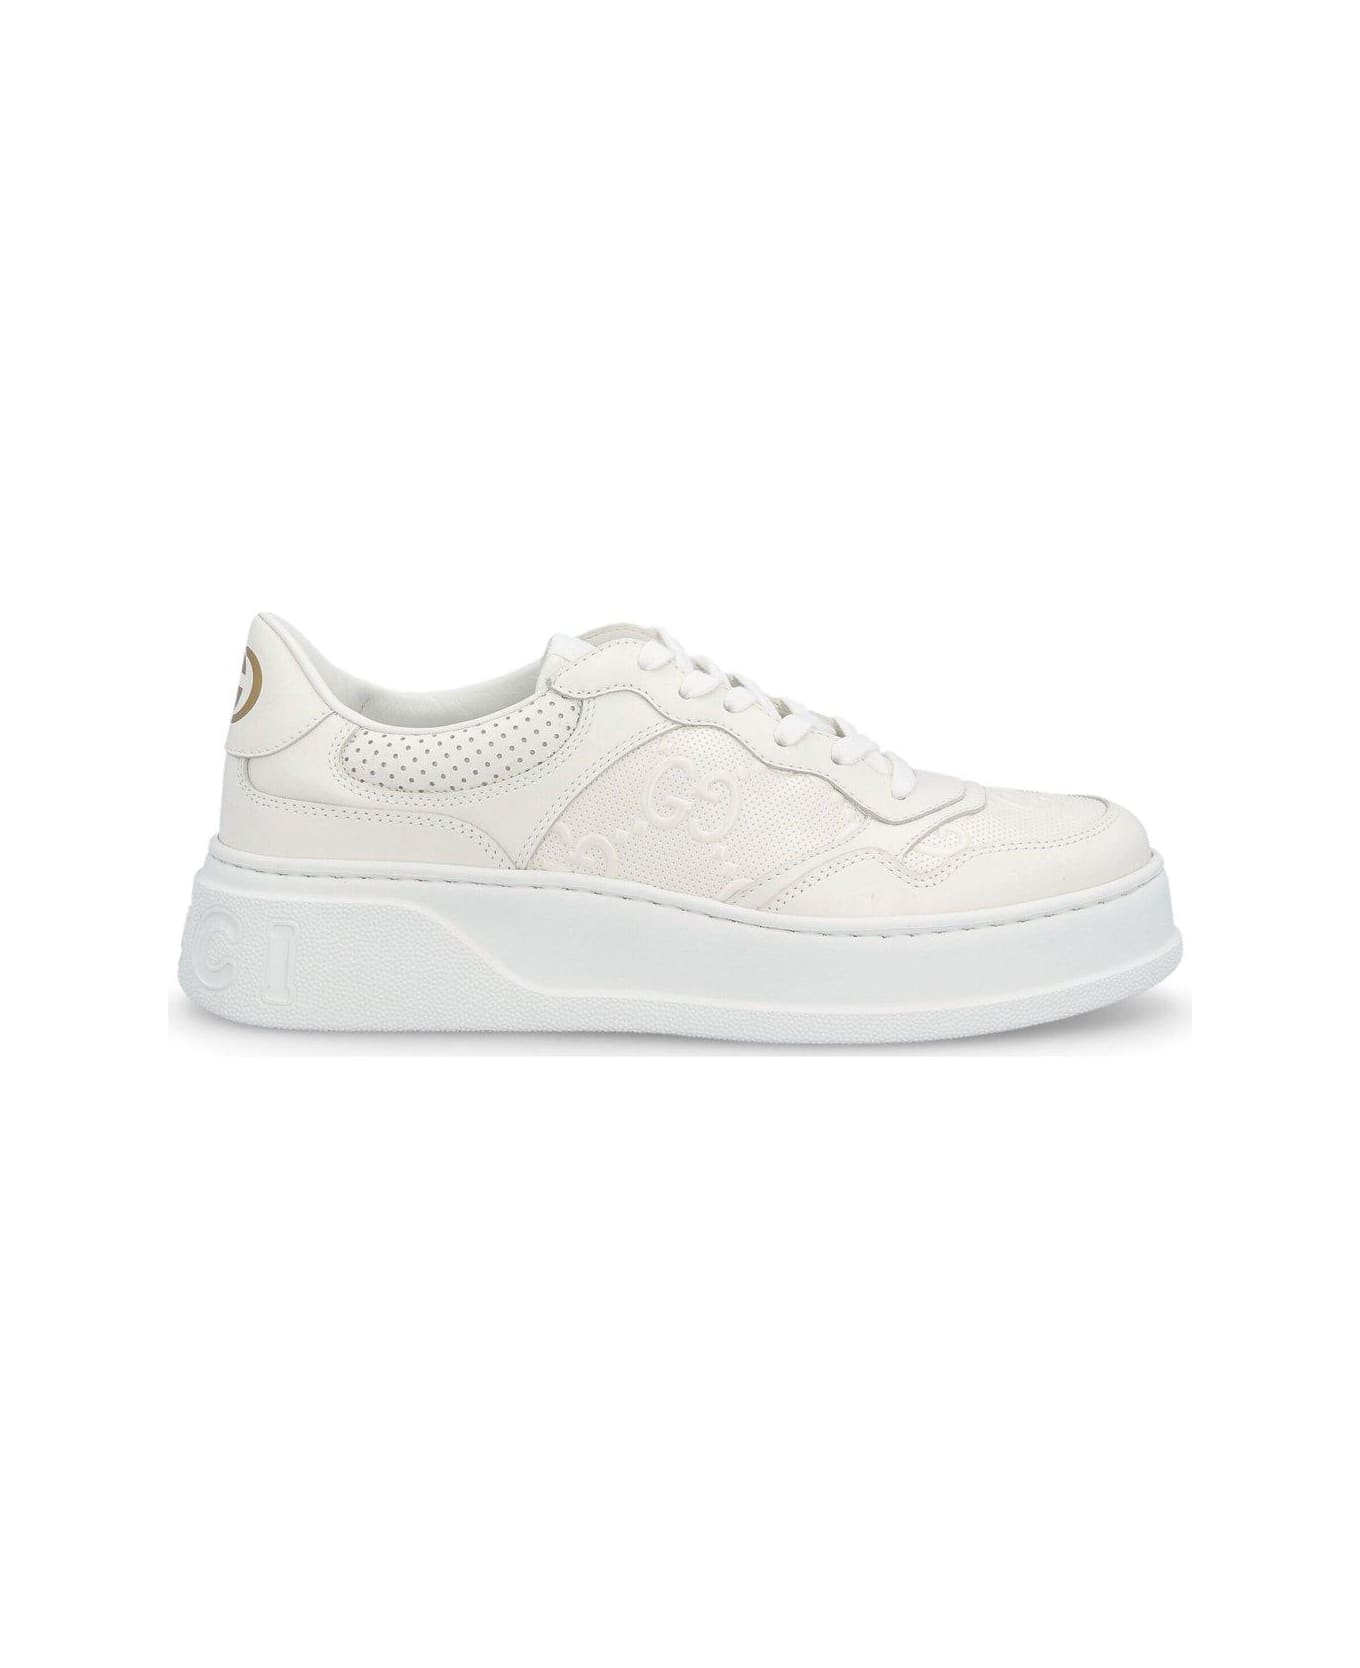 Gucci Gg Embossed Sneakers スニーカー